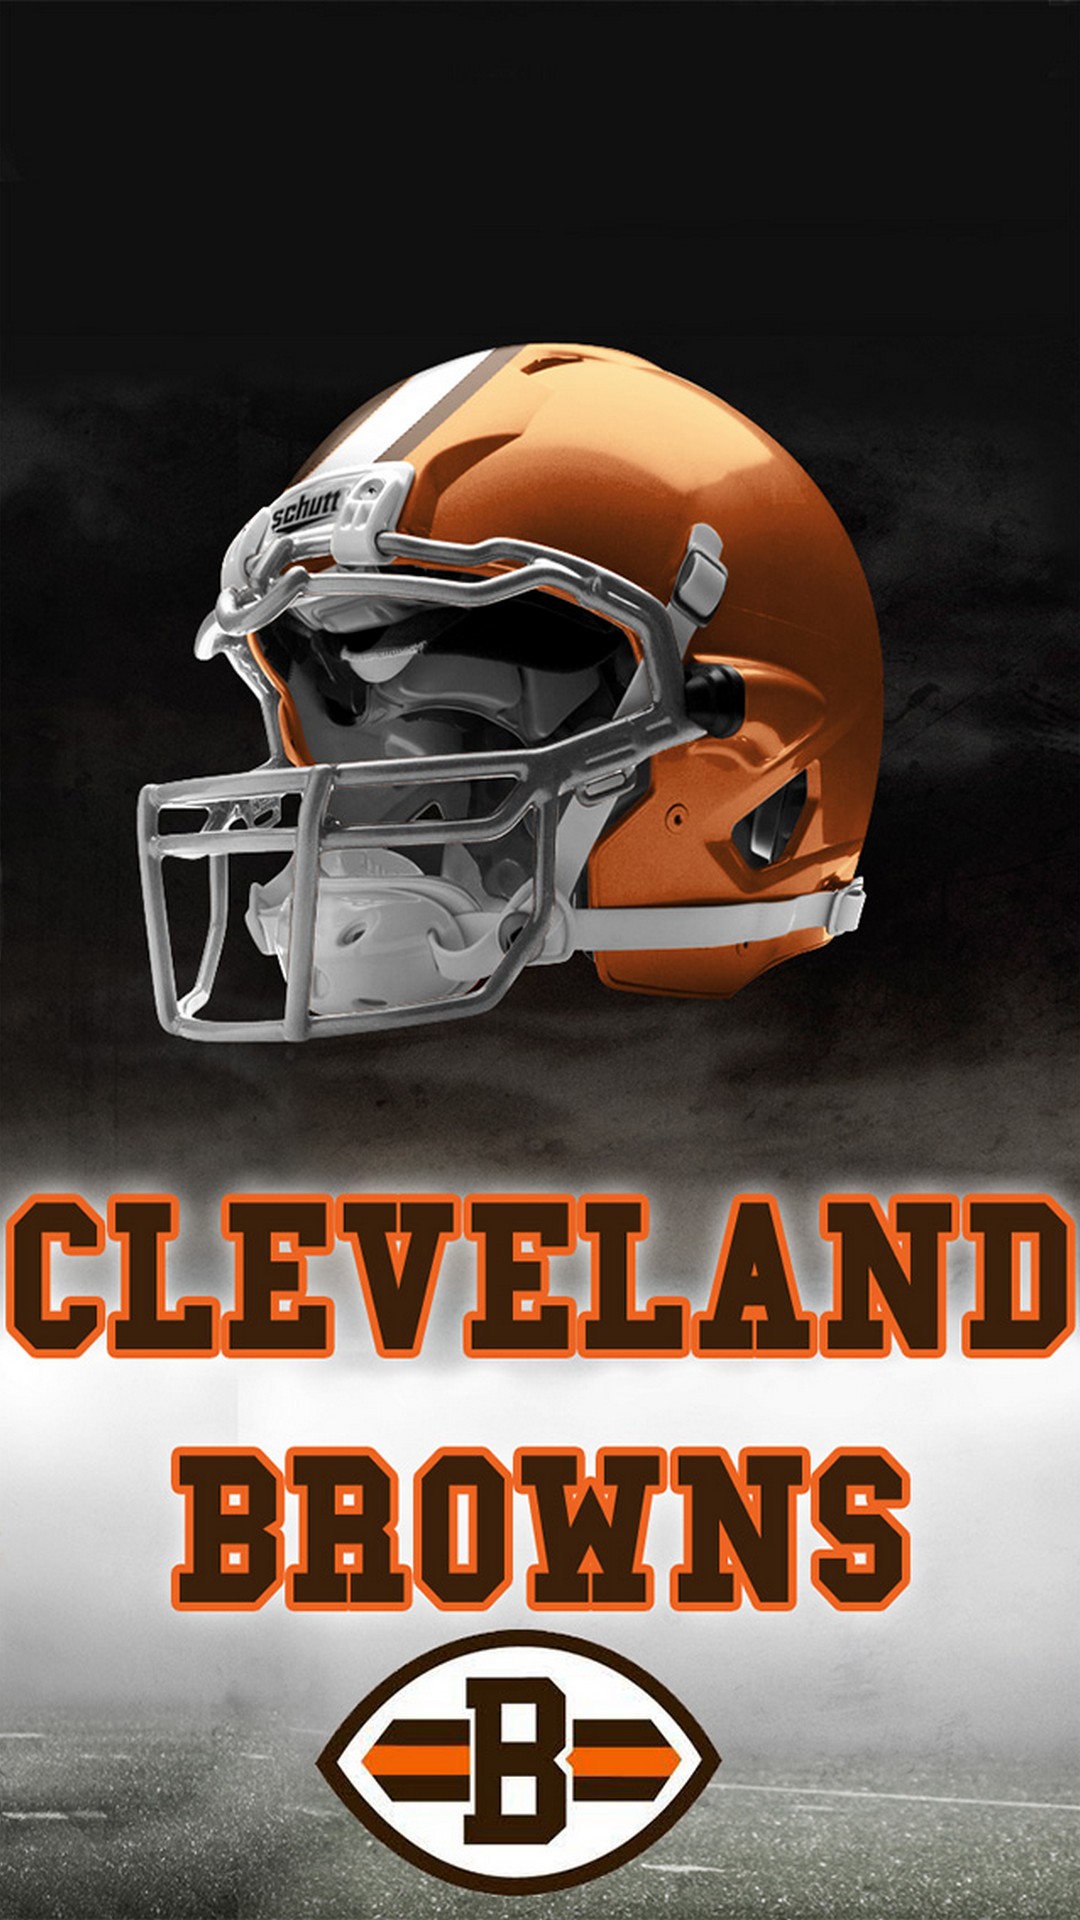 Cleveland Browns iPhone 6 Plus Wallpaper with high-resolution 1080x1920 pixel. Download and set as wallpaper for Apple iPhone X, XS Max, XR, 8, 7, 6, SE, iPad, Android